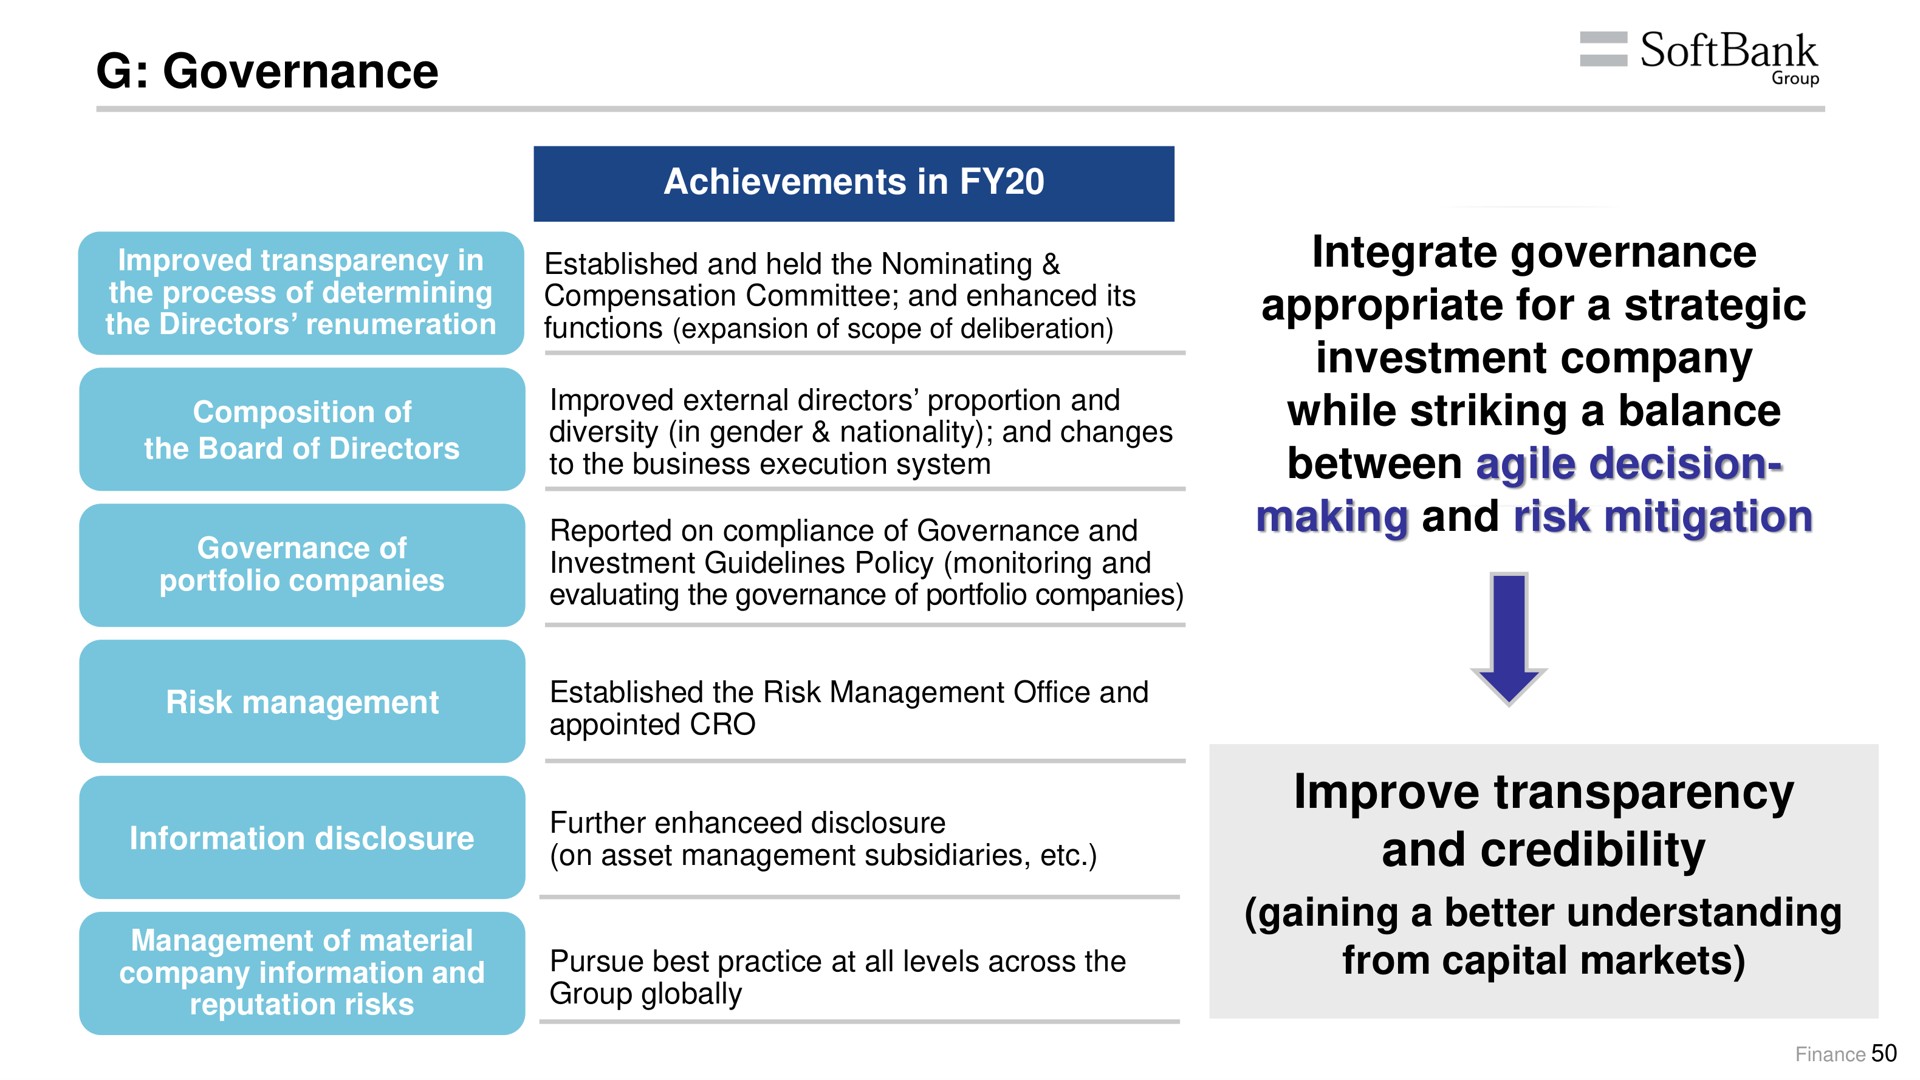 governance integrate governance appropriate for a strategic investment company while striking a balance between agile decision making and risk mitigation improve transparency and credibility gaining a better understanding from capital markets | SoftBank